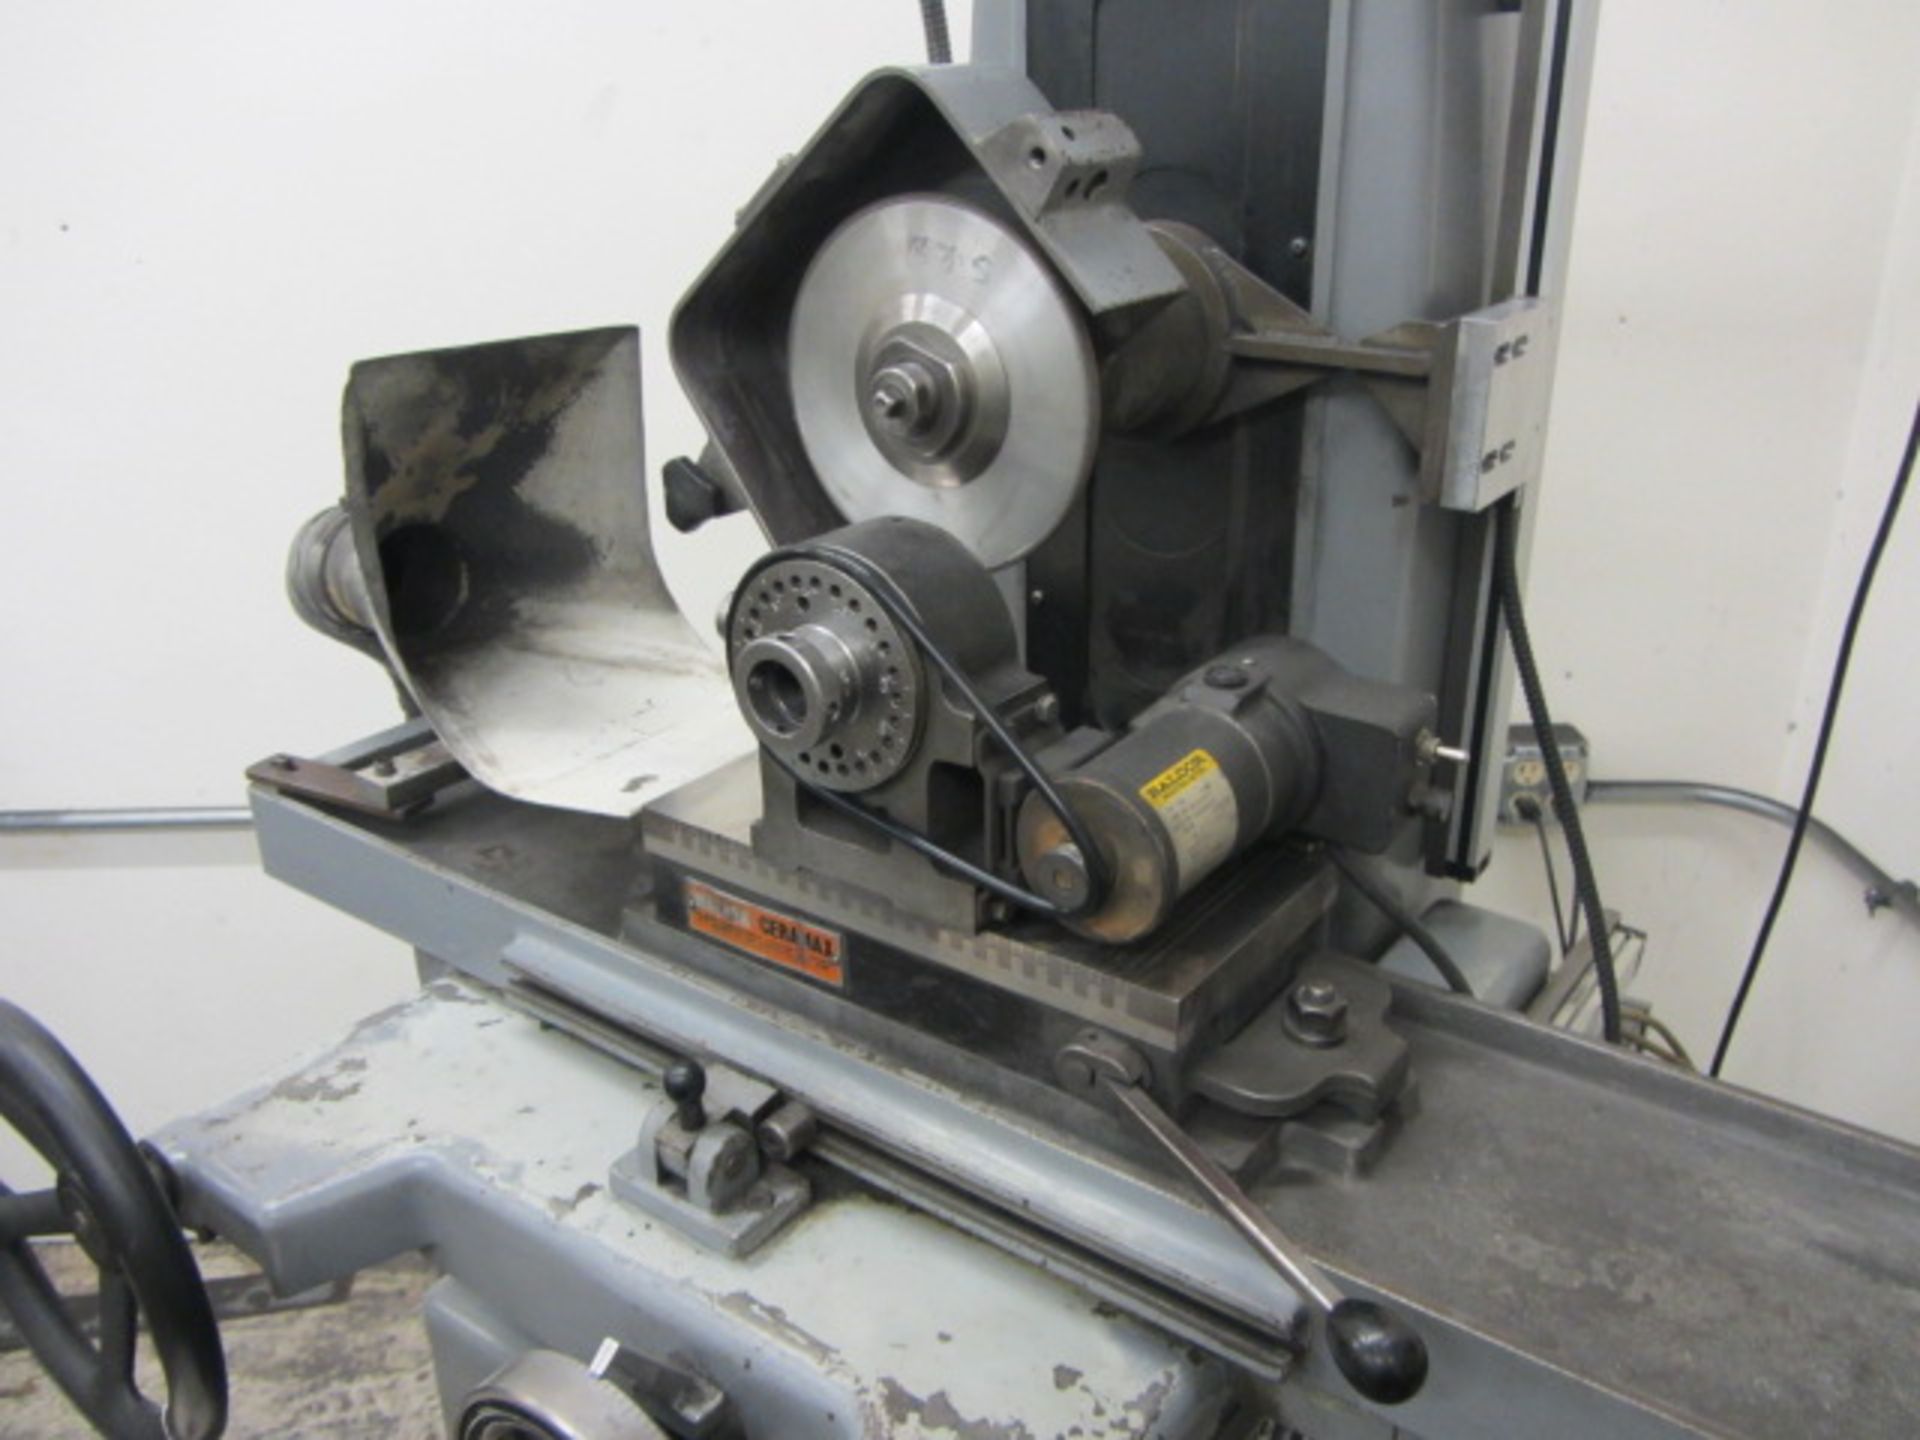 Okamoto OMA-350 6'' x 12'' Hand Feed Surface Grinder with Permanent Magnetic Chuck, Fagor Innova - Image 5 of 6